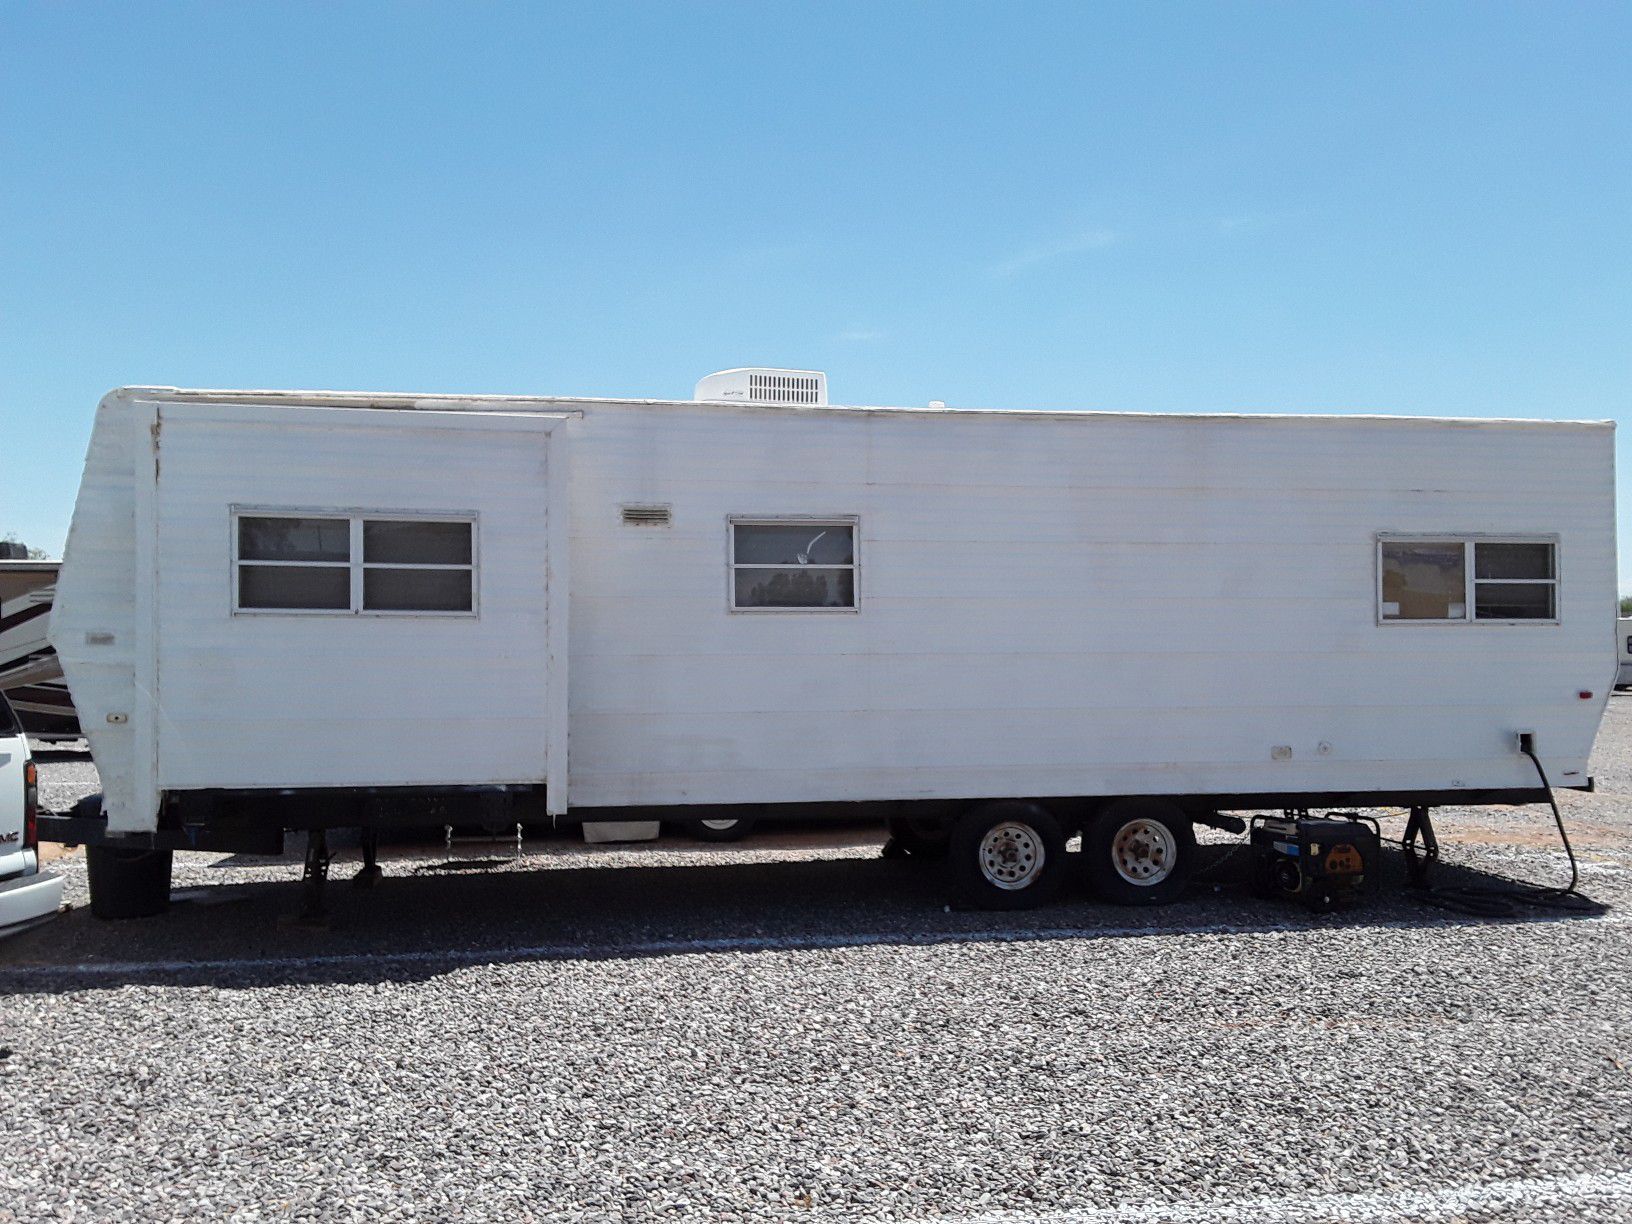 2006 travel trailer. 2100 first come